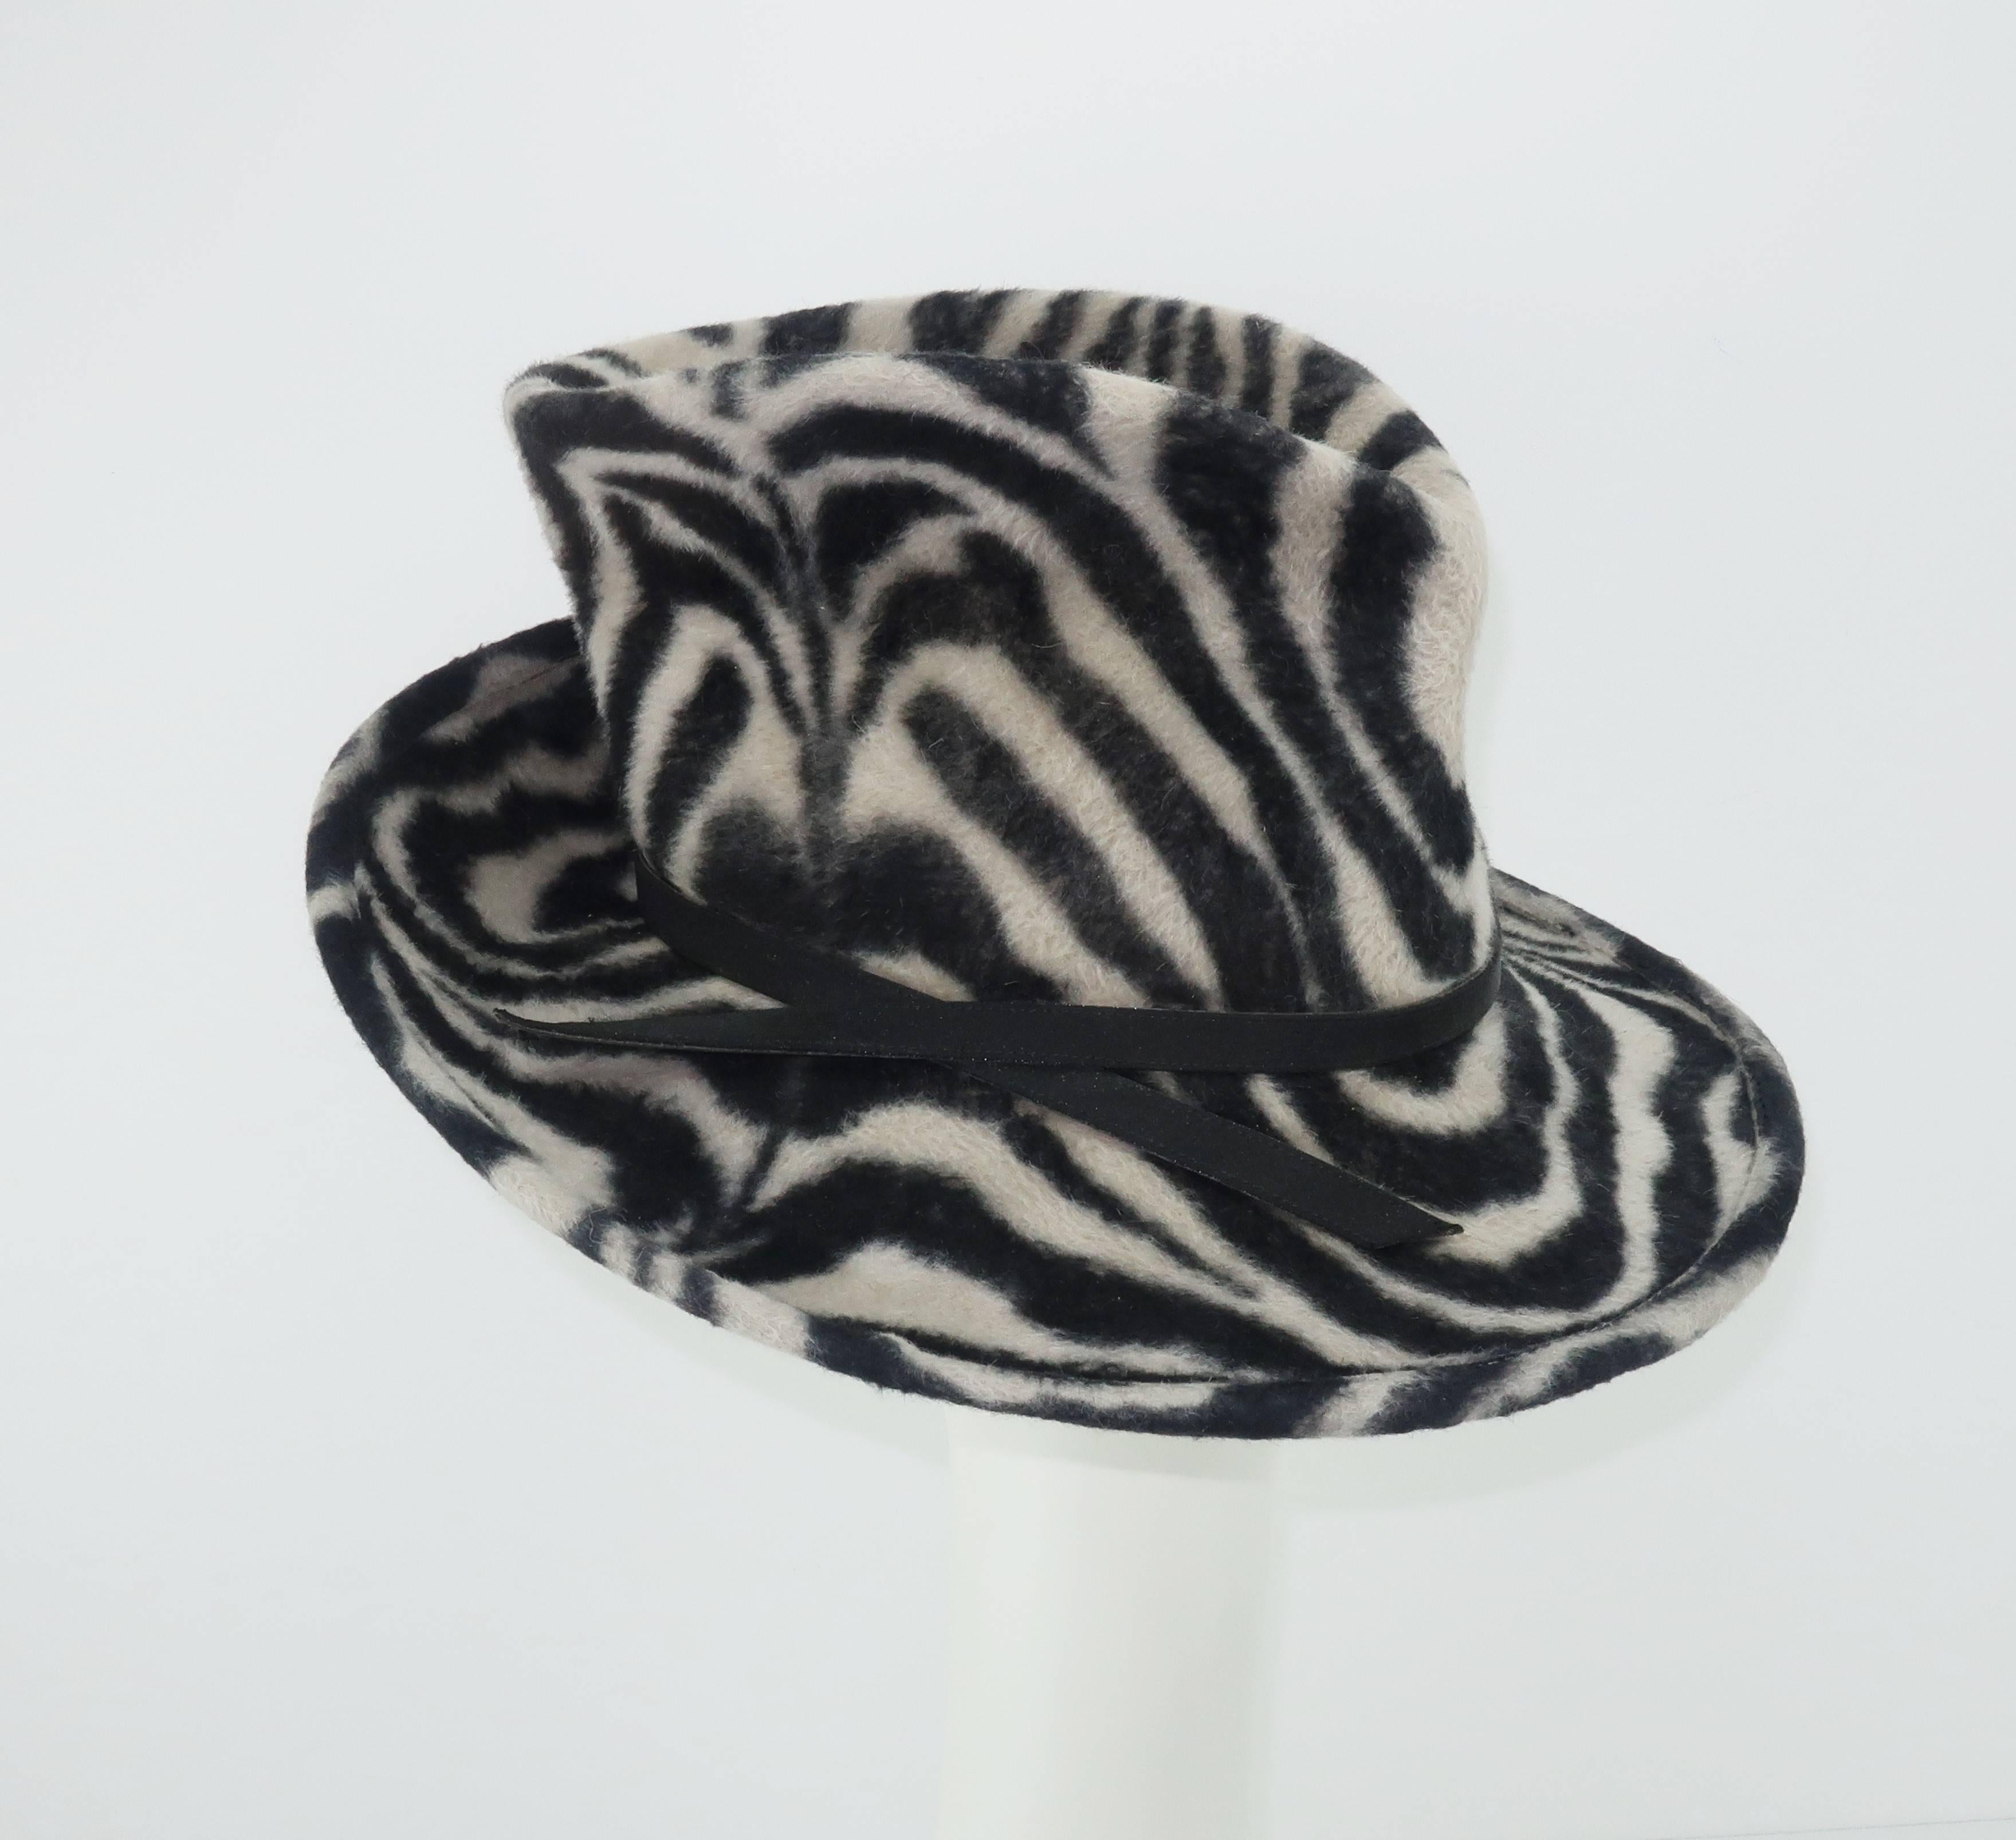 Wild and woolly!  This Philip Treacy hat has an abundance of attitude and style.  The stylized fedora shape is upturned, downturned and pinched for the ultimate fashionable effect.  The soft wool resembles a faux fur in a light gray and black animal